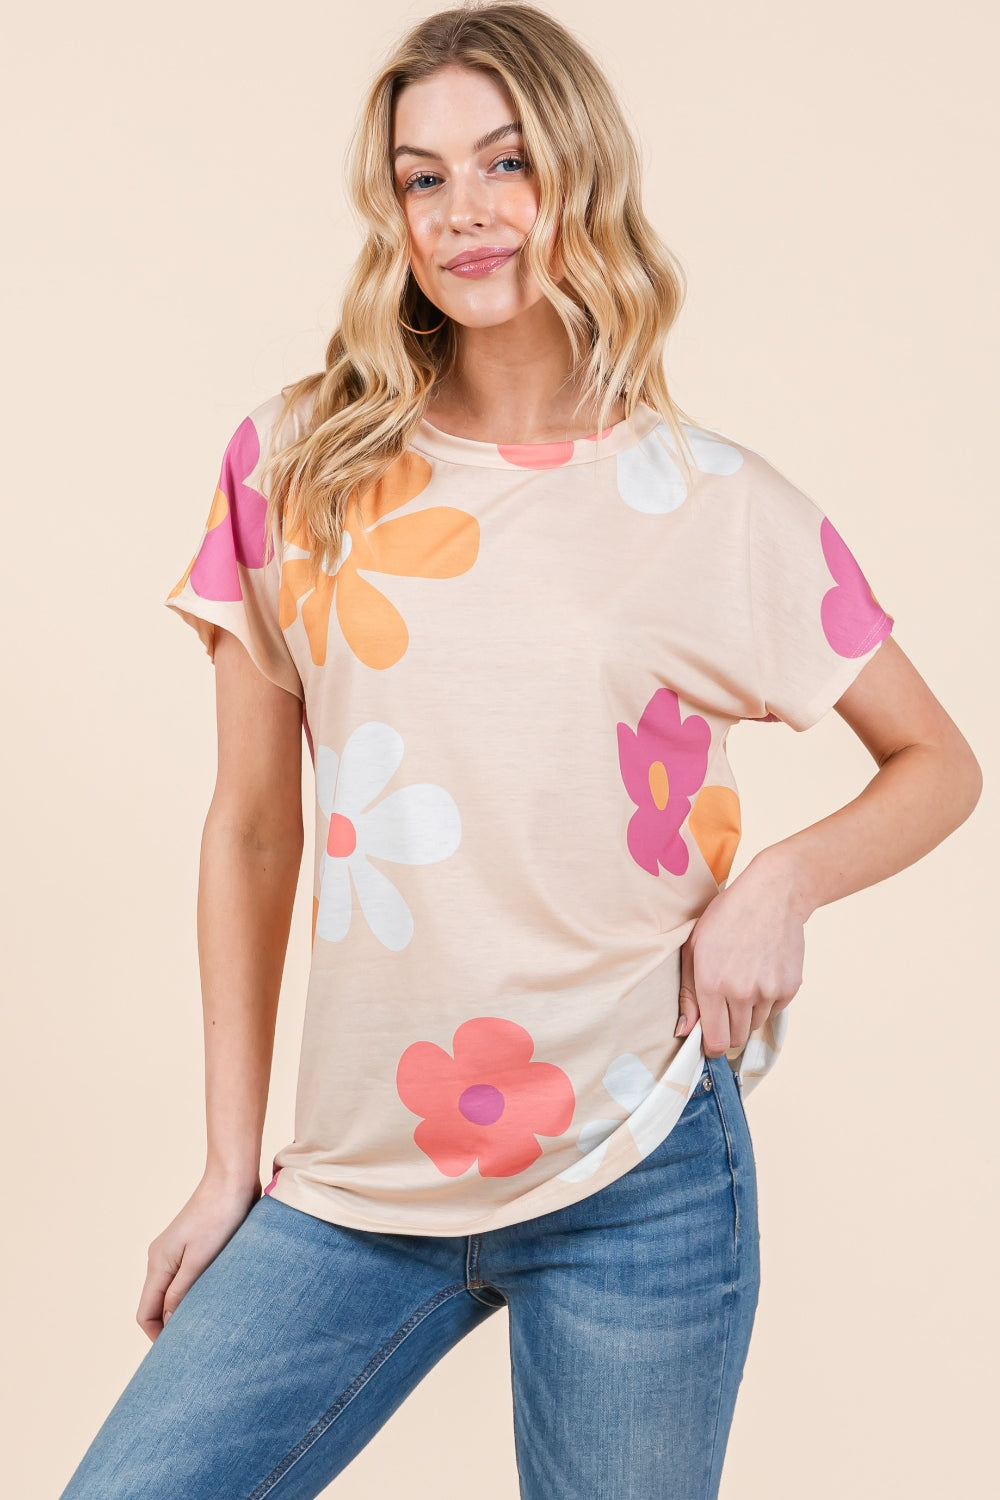 Floral Short Sleeve T-Shirt Casual Chic Botique